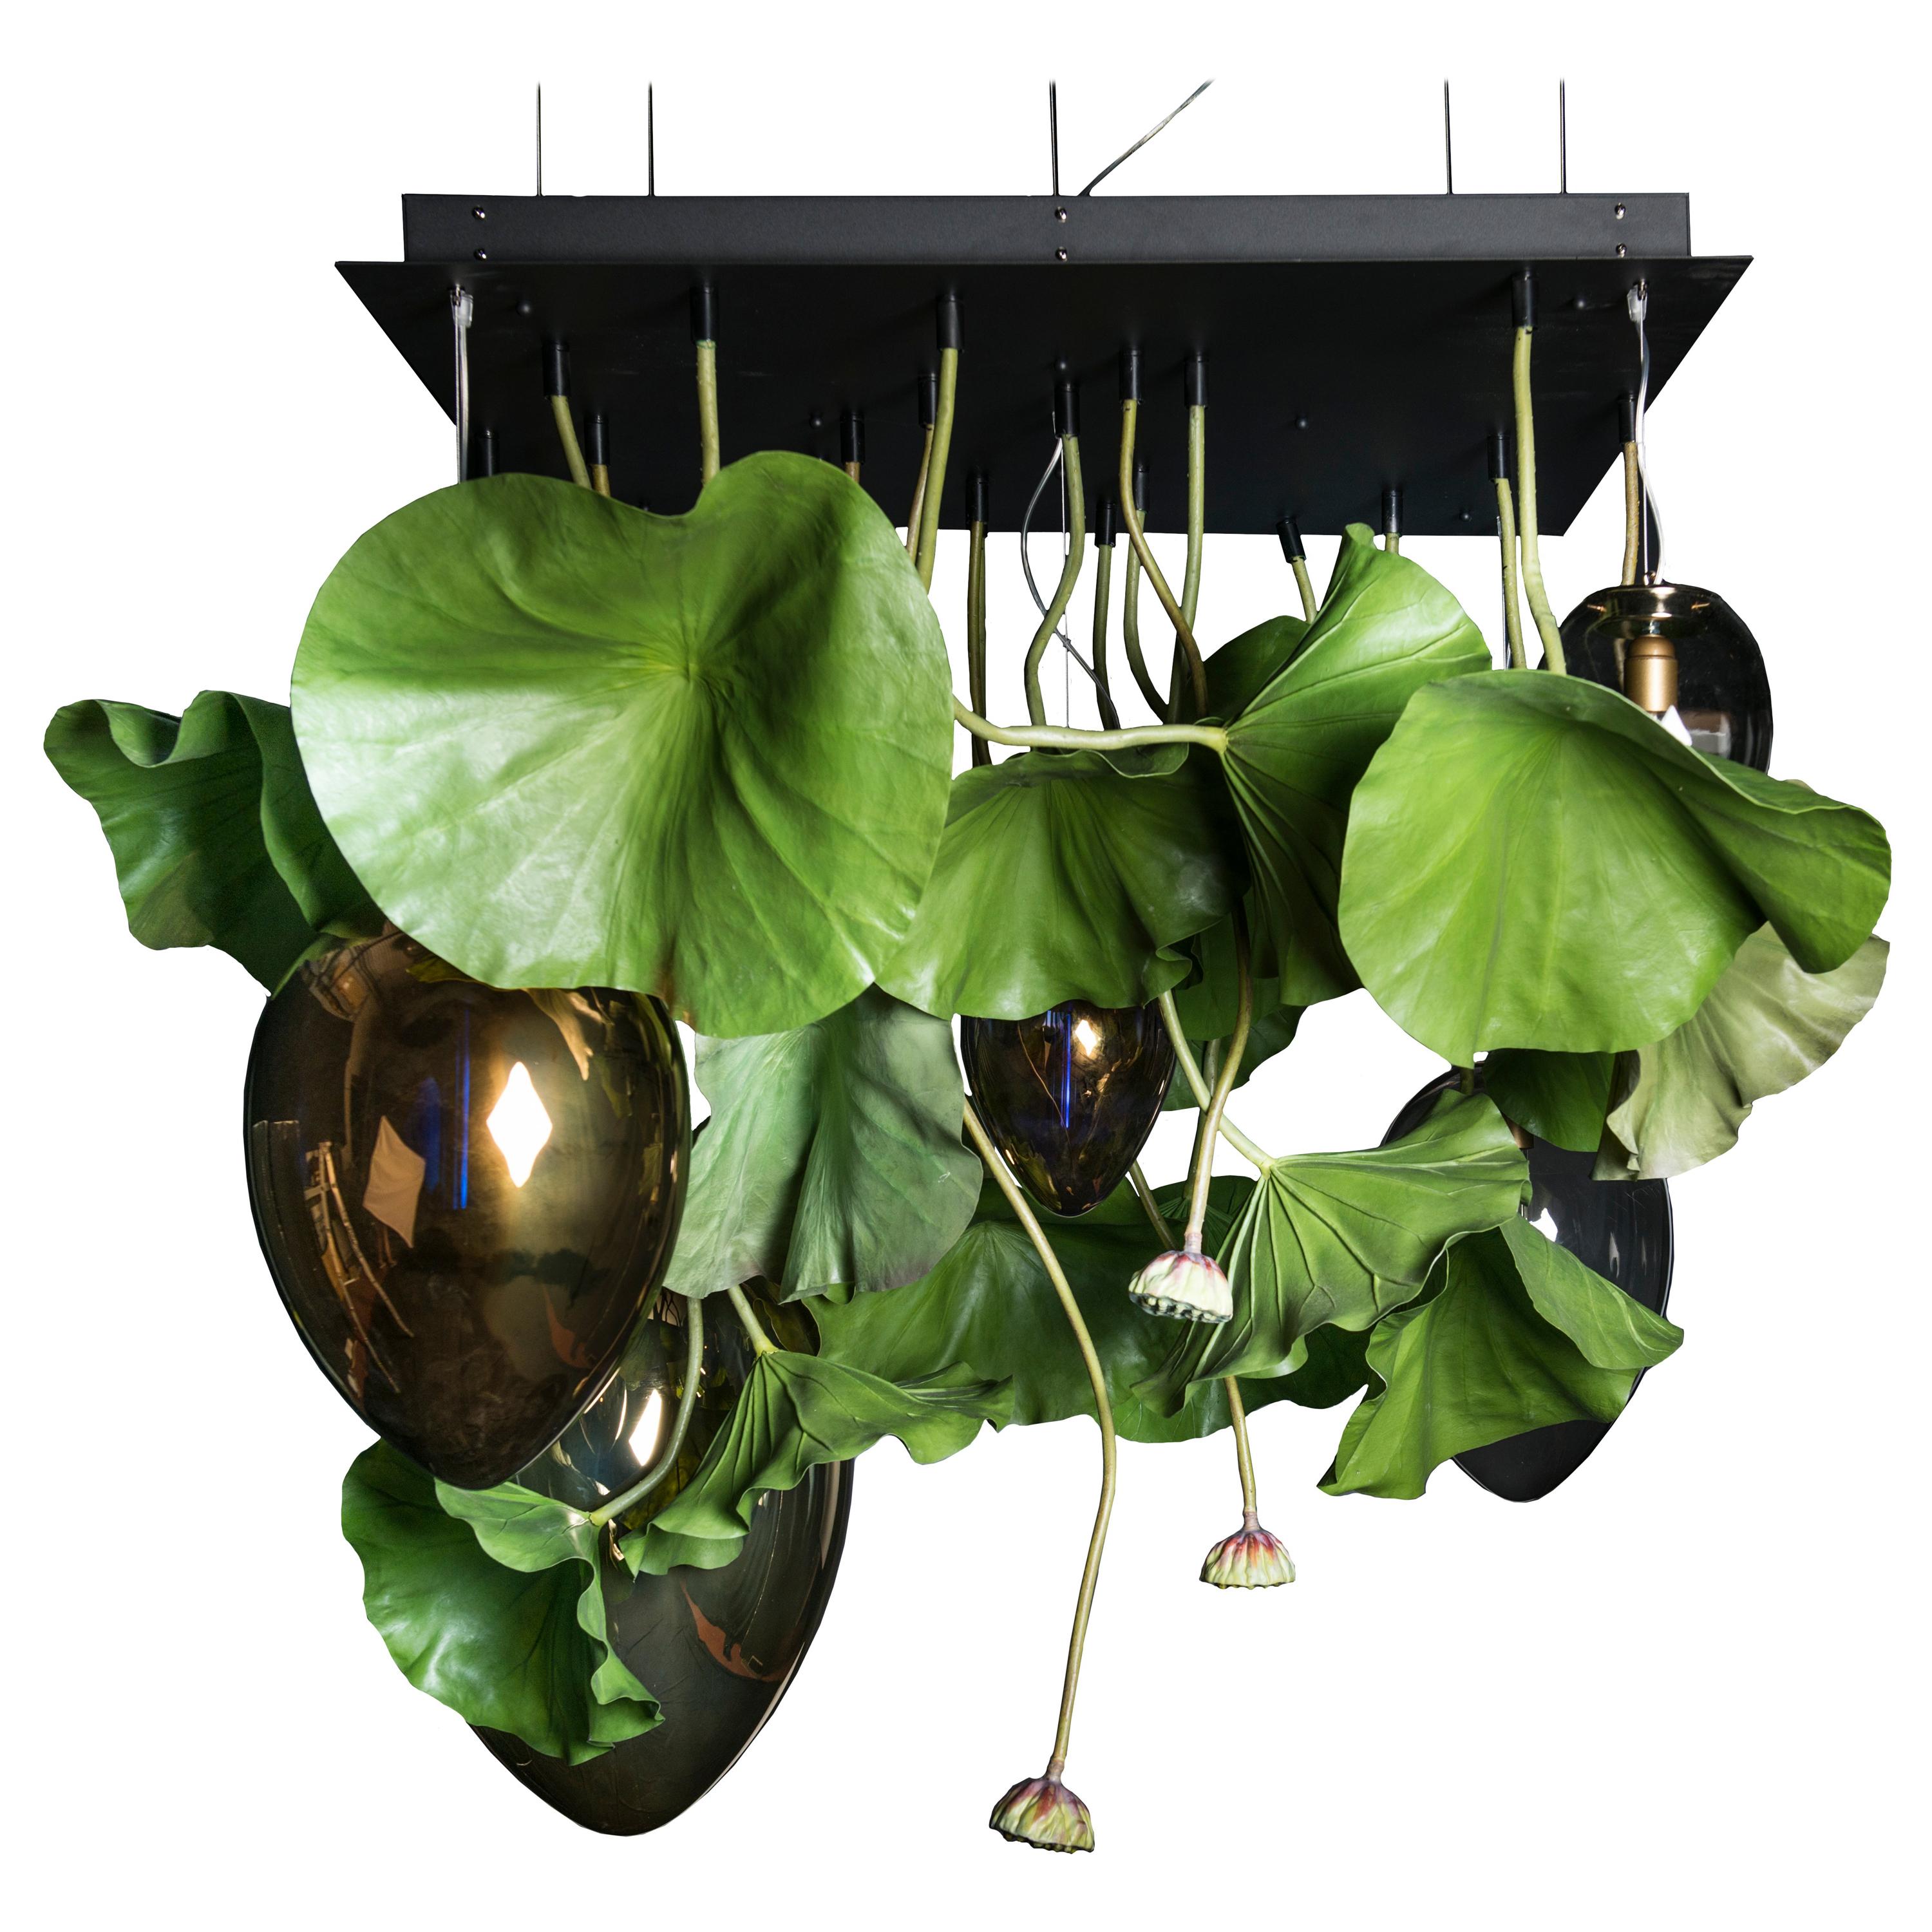 Flower Power Lotus with Eggs in glass Chandelier, cm h 100 150x150, Italy